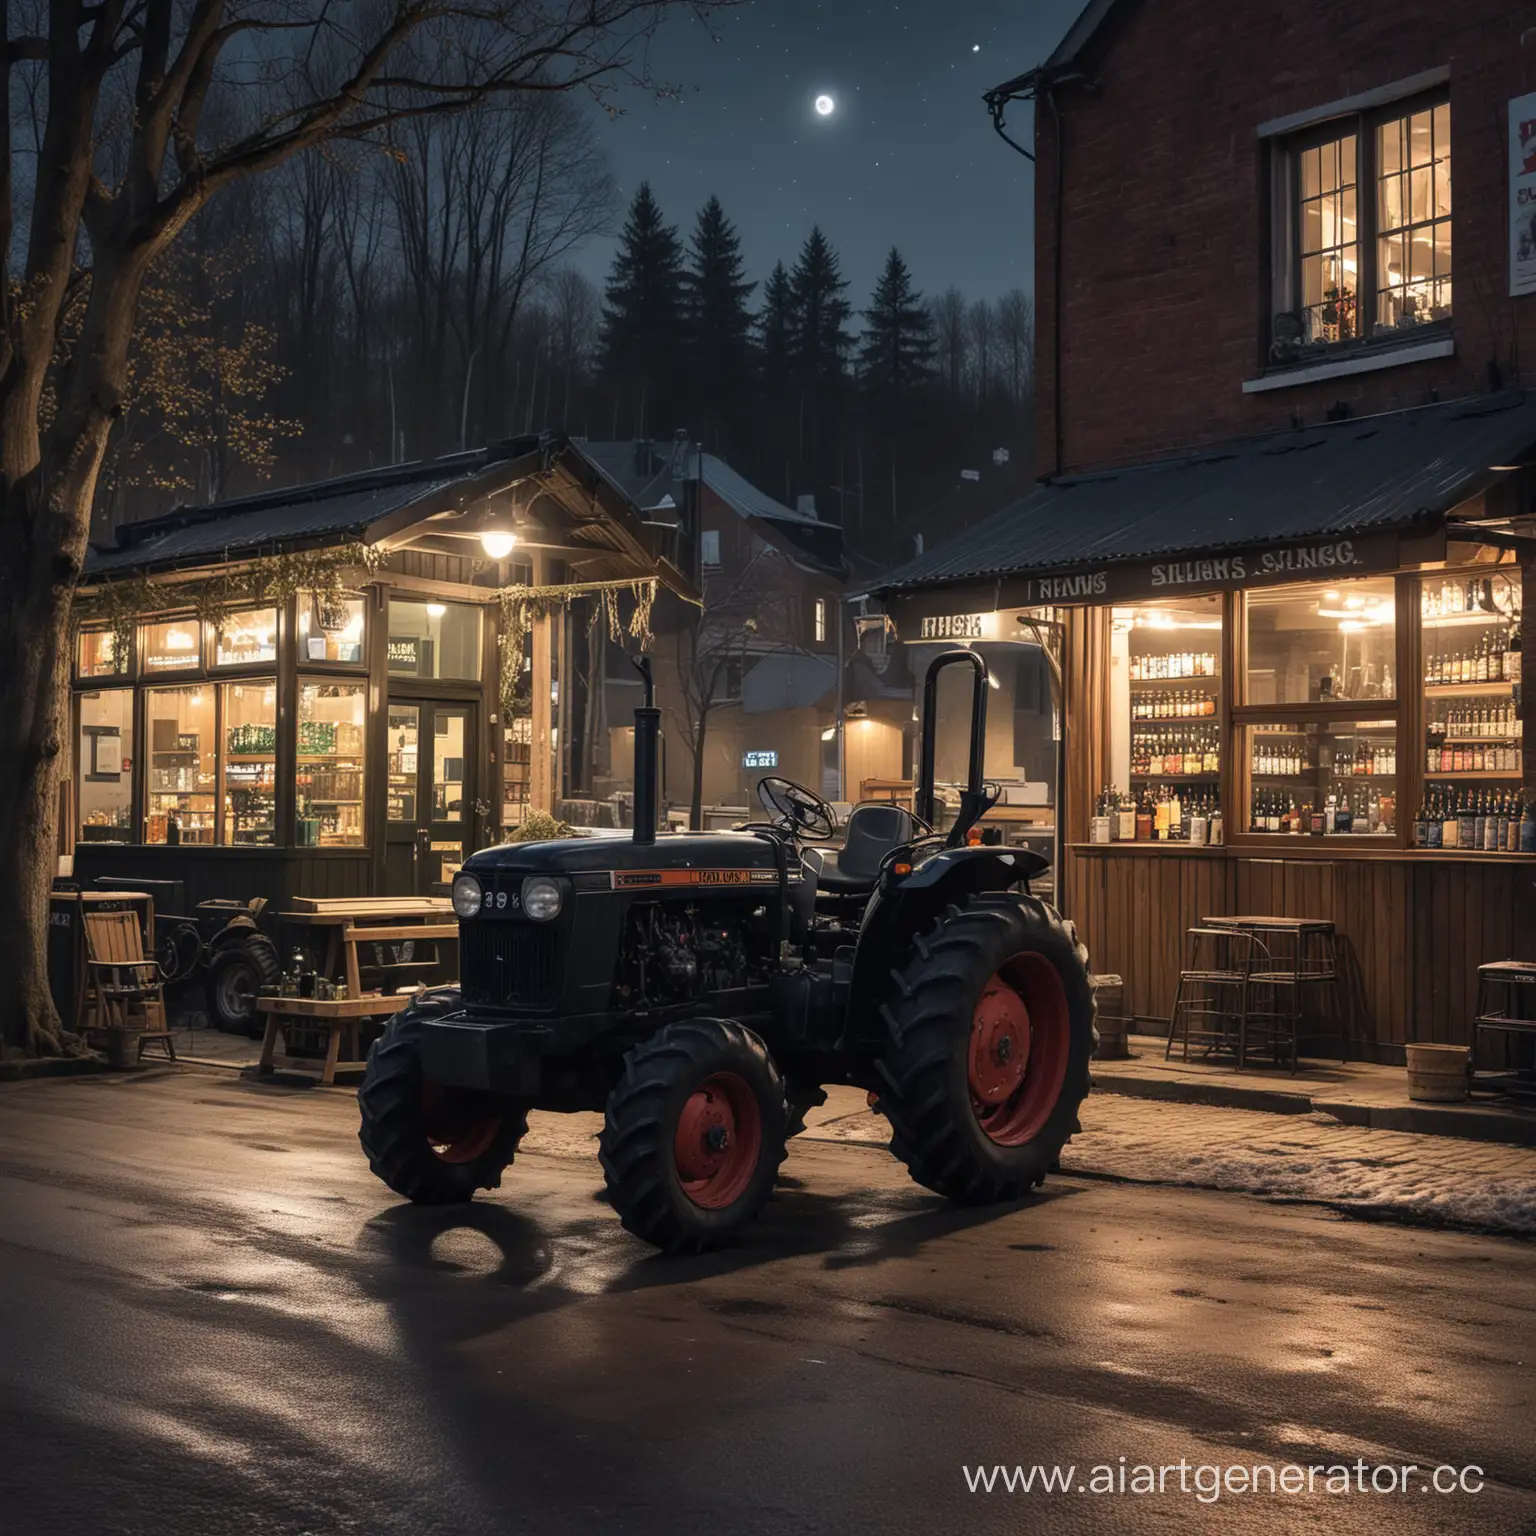 Rural-Nightlife-Black-Tractor-and-Beer-Shop-by-the-Forest